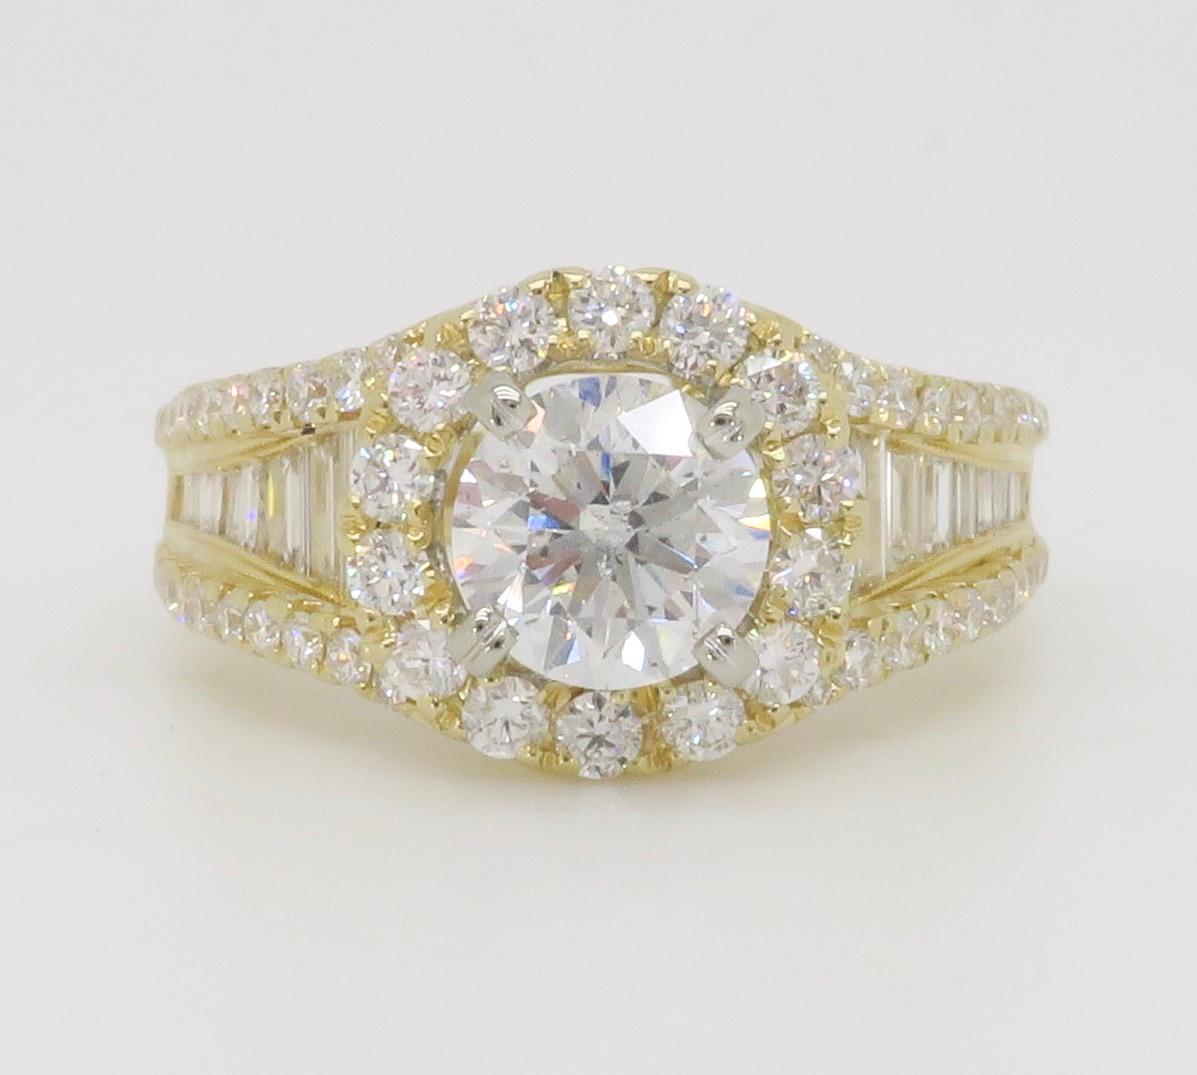 2.04CTW Diamond Engagement Ring in 14k Yellow Gold For Sale 2